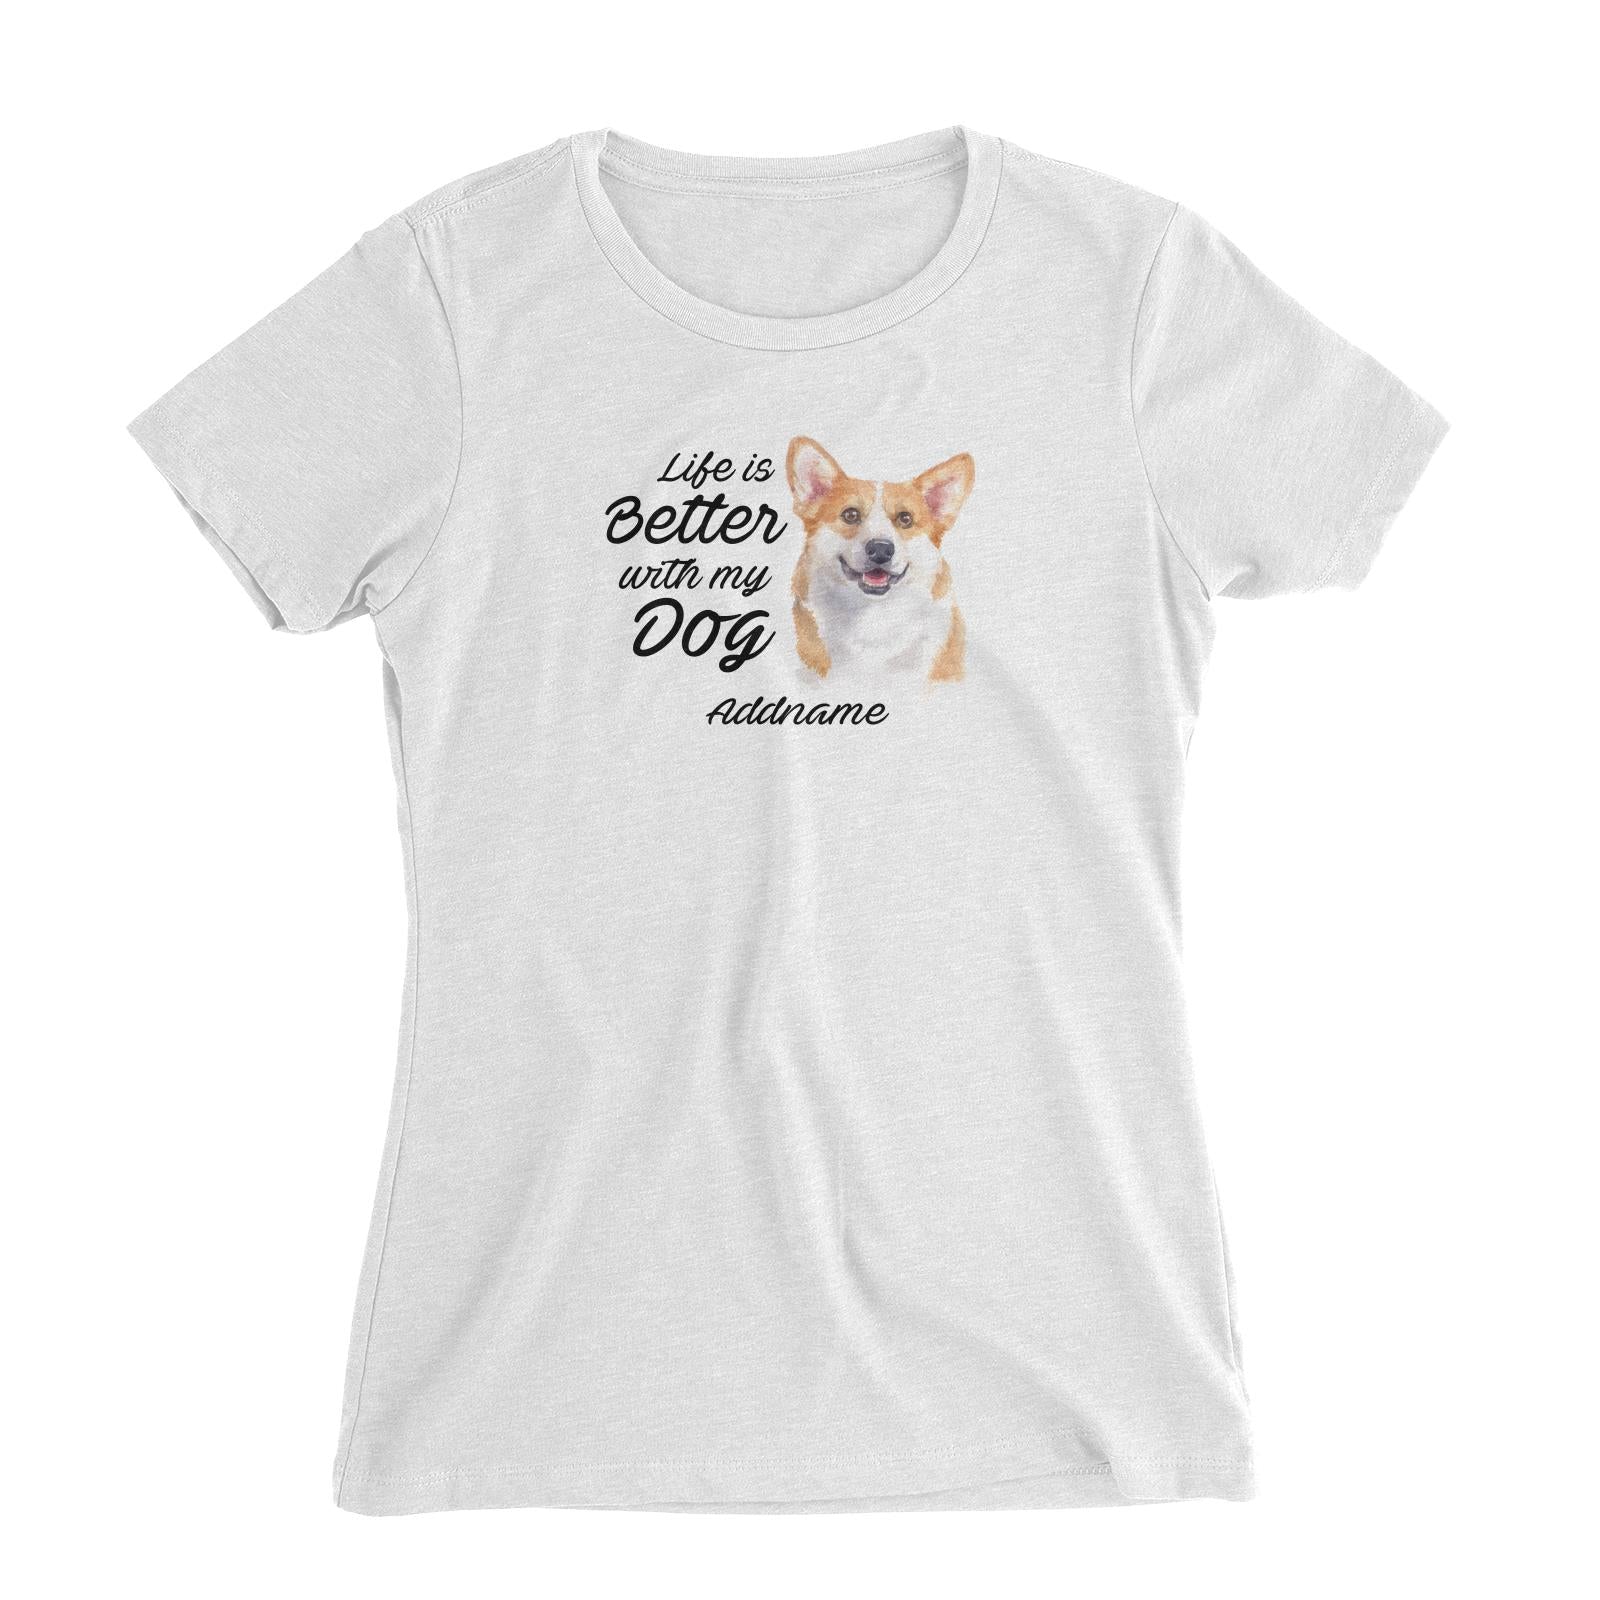 Watercolor Life is Better With My Dog Welsh Corgi Smile Addname Women's Slim Fit T-Shirt